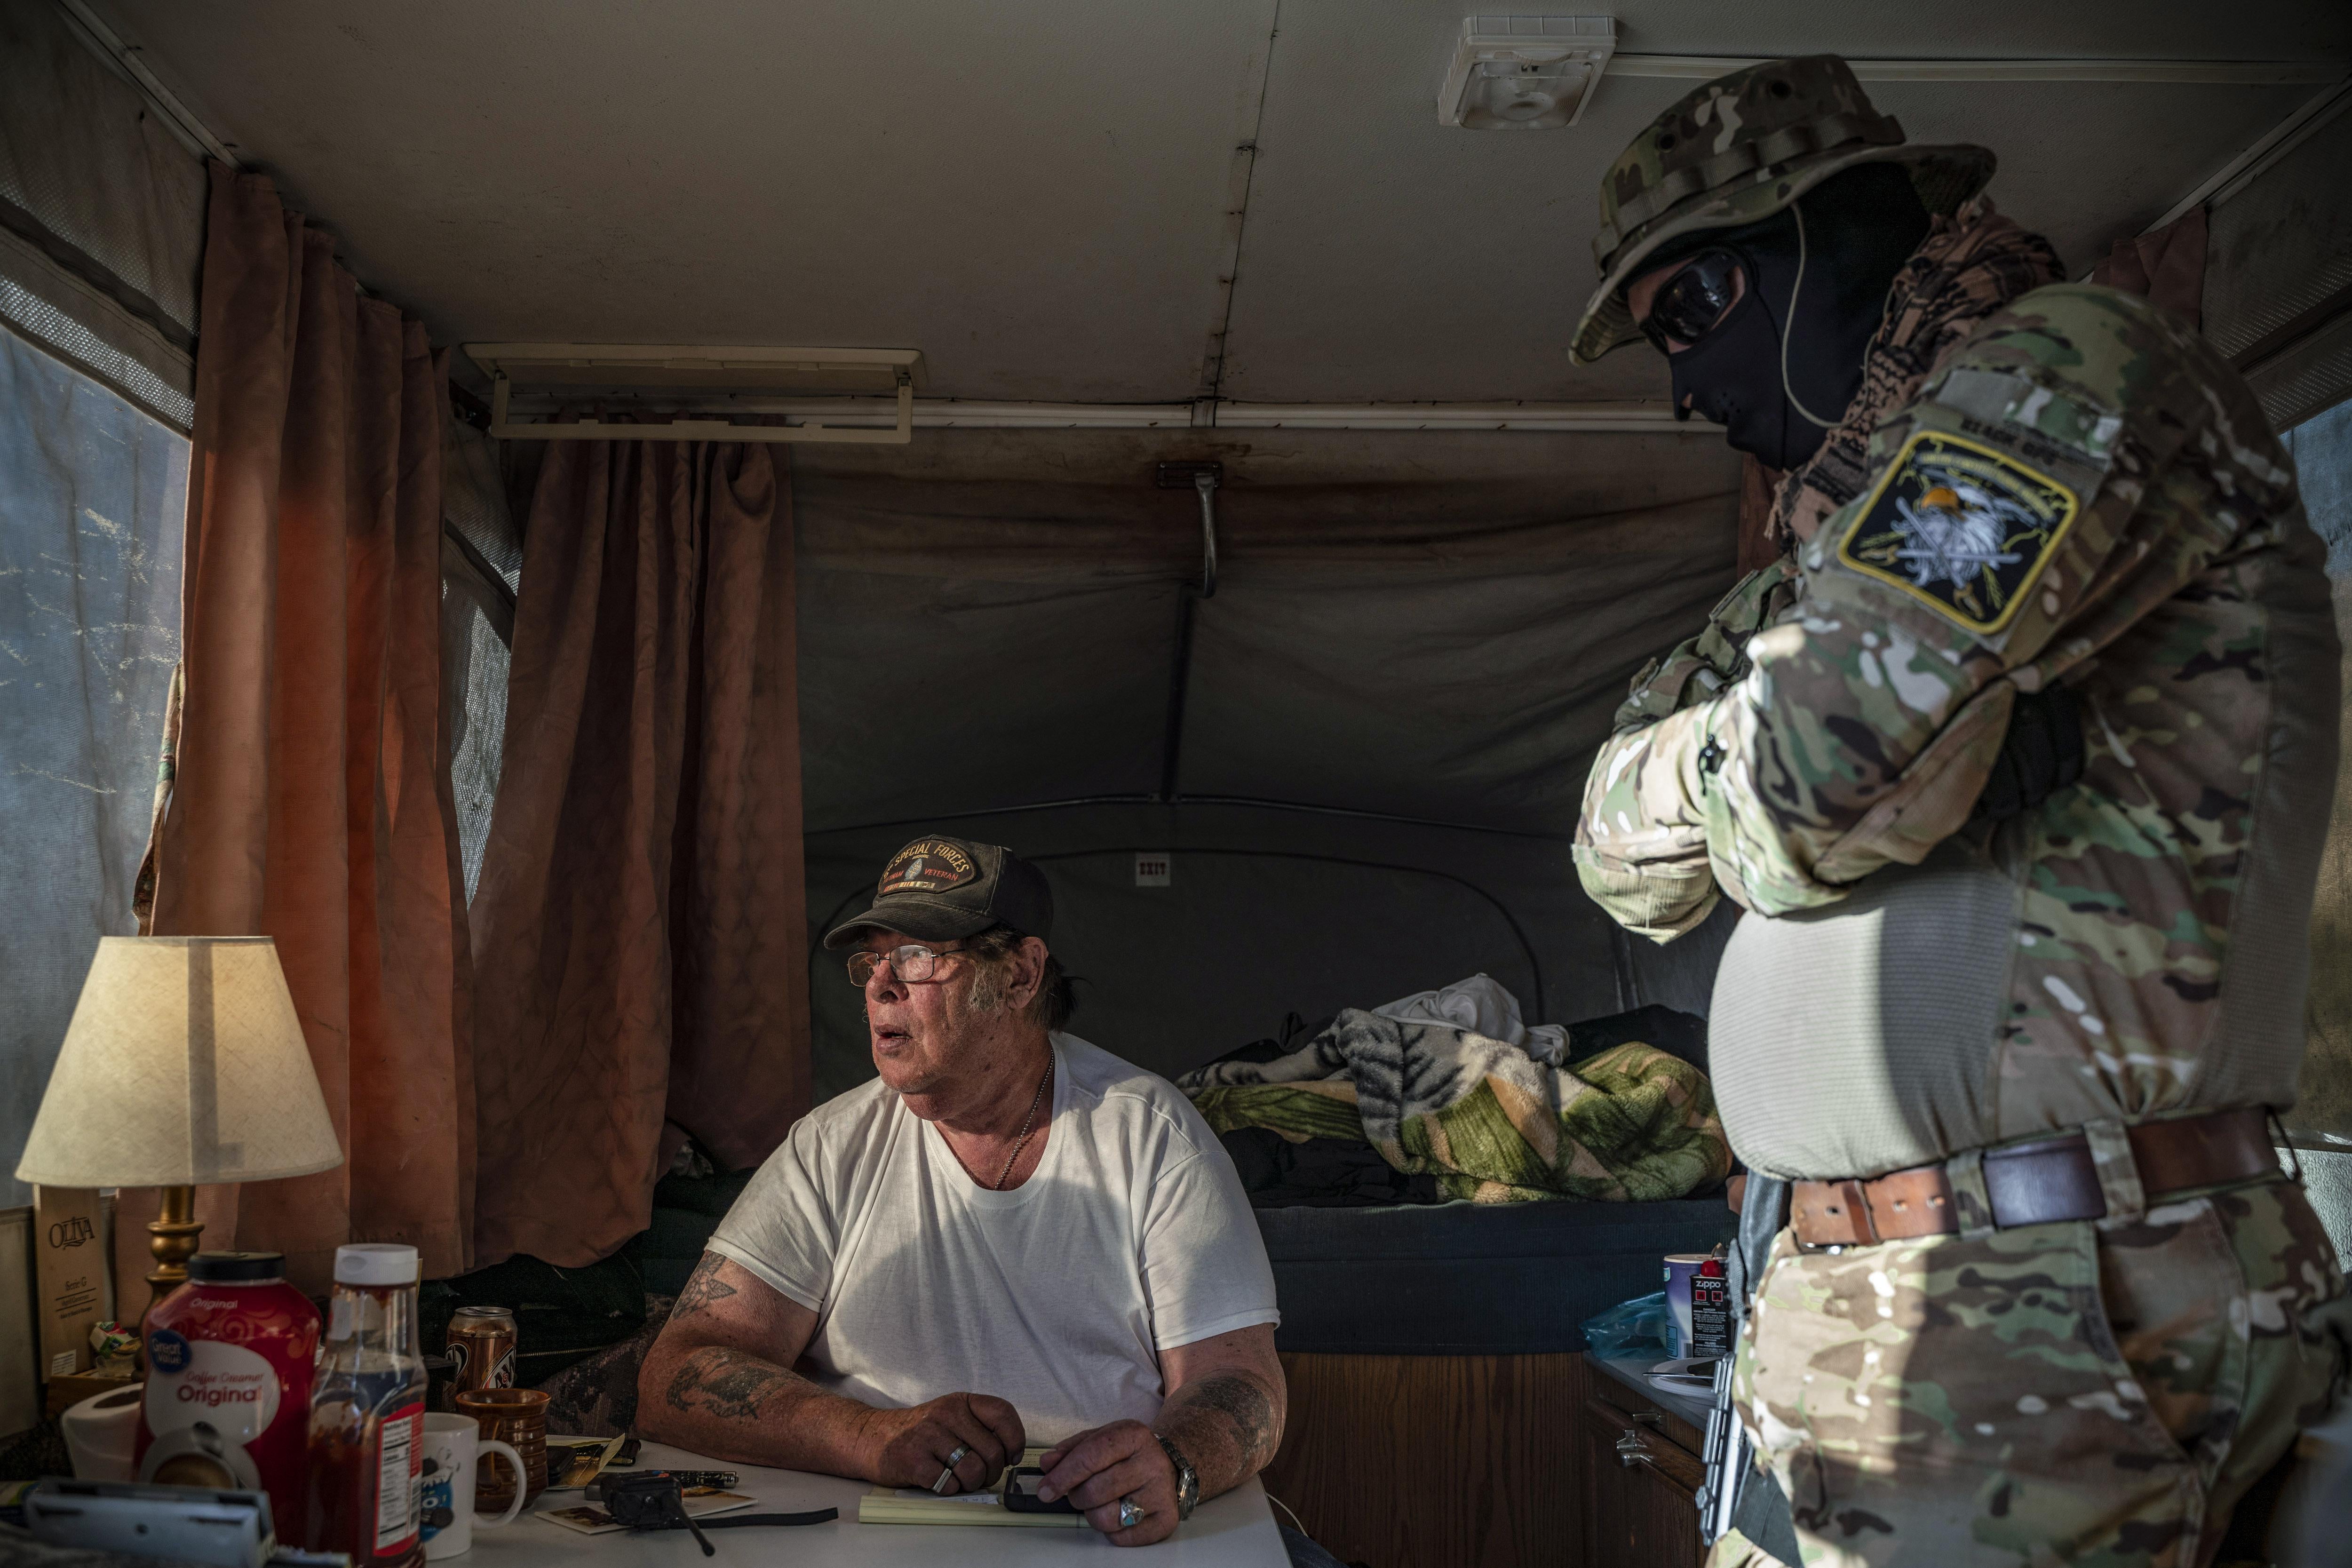 A man dressed in camo and a mask speaks with a man in a T-shirt inside a camper.